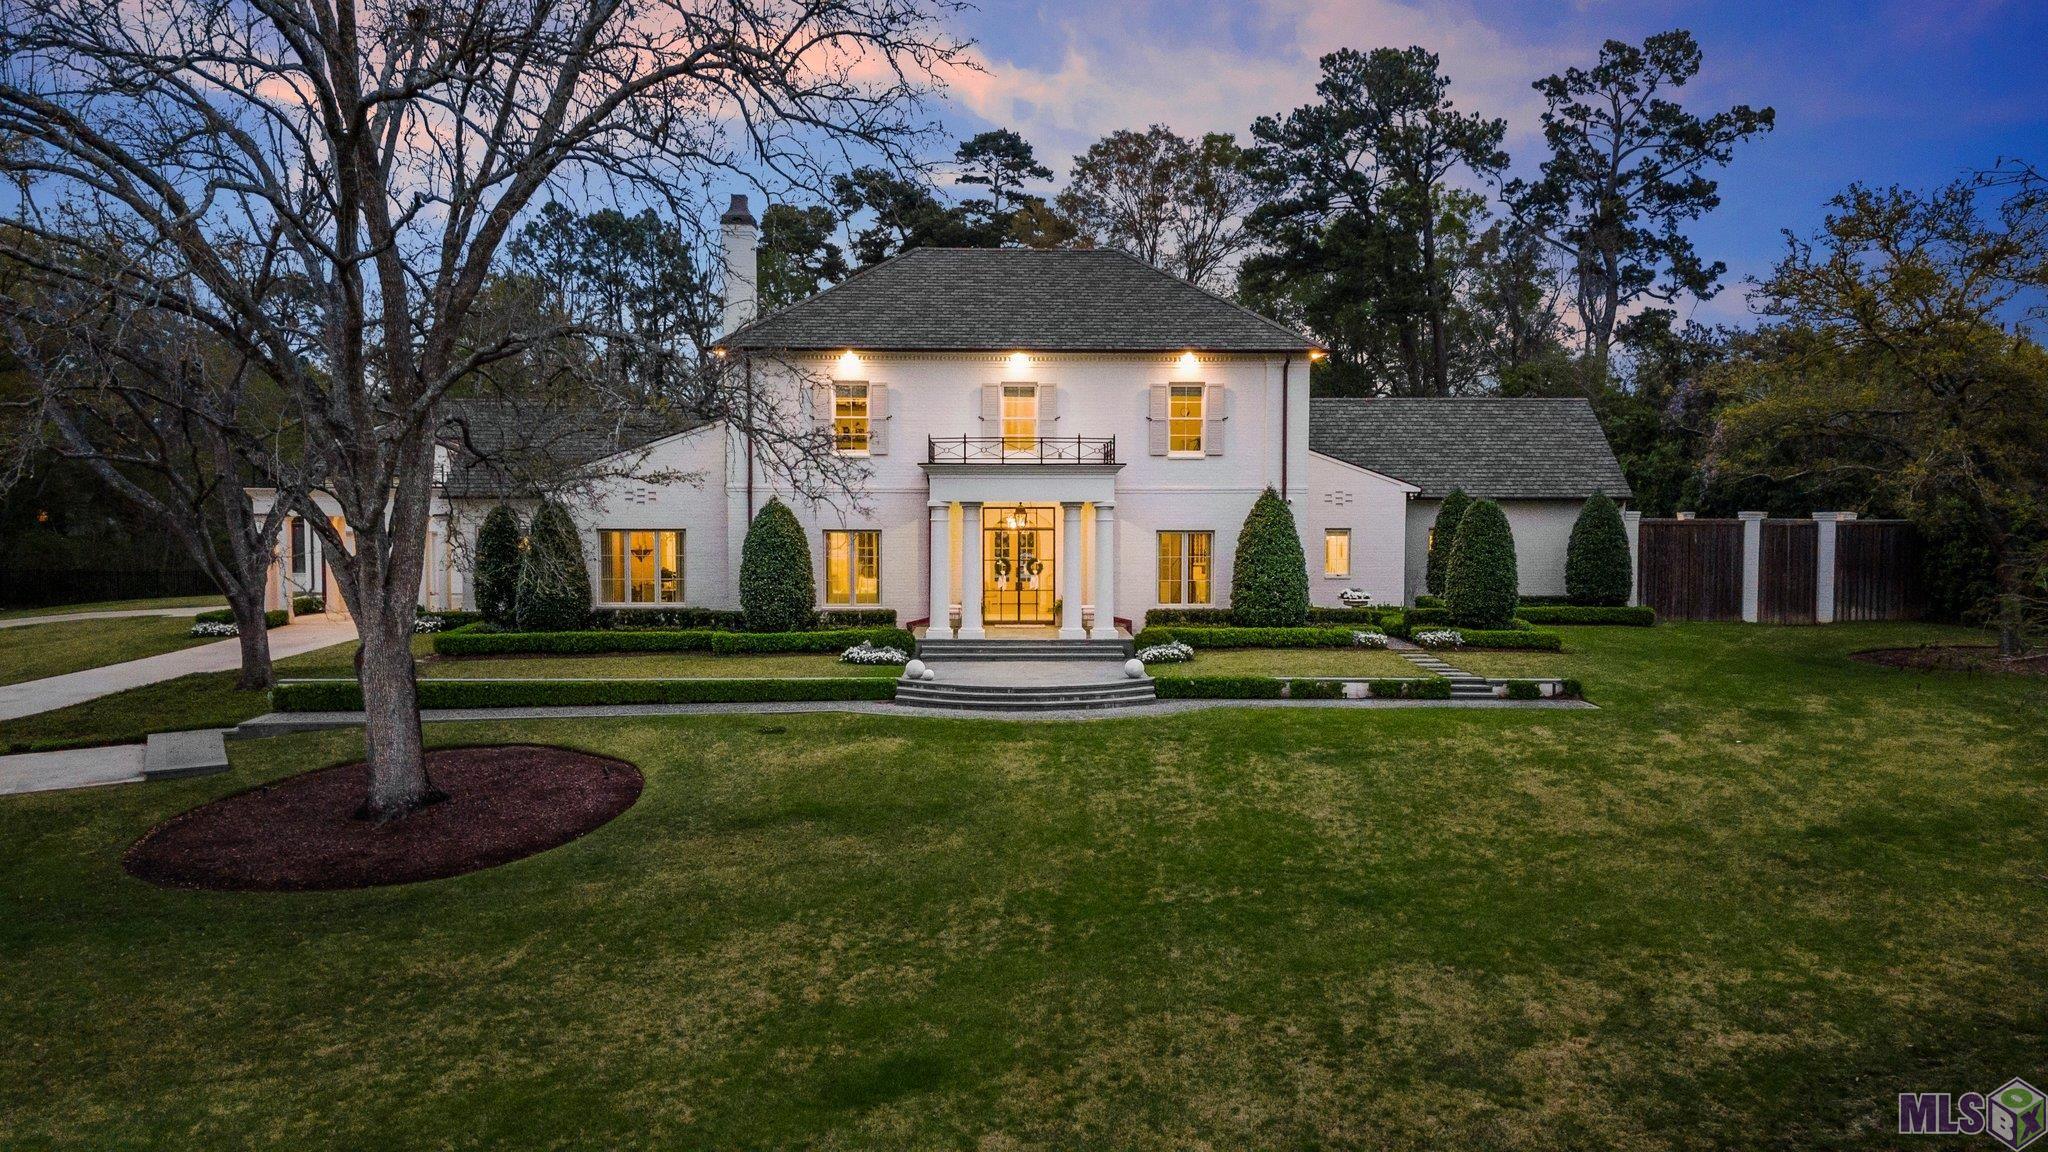 One of Baton Rouge’s most luxurious and stunning estates that was custom built in 2018. This home sits on 1.75 rolling acres in the middle of town in the highly sought after Southdowns/ Meadow Lea area and graced the cover of Traditional Home magazine in 2023. No expense was spared building this one of a kind beautiful home, designed by Hoffpauir Studio Architects, built by Bernhard Normand Construction and decorated by Colleen Waguespack of CW Interiors. Custom made steel and glass front doors from Chateau Dominque in Houston, TX welcomes guests to take in every exquisite detail inside. 4 bedrooms, 5 ½ bathrooms. Large foyer with custom iron curved staircase, formal living room, formal dining room, wine room/gentleman’s library or study with climate control steel and glass wine storage unit, stunning long gallery/hall with exposed natural beams, breakfast area, and den/keeping room, . Large kitchen with custom finishes, butler's pantry and top of the line appliances. A unique side sunroom welcomes guests off the porte cochere, office and maildrop area off sunroom, full workout/gym area above garage with full bath and steam shower. Huge master suite with floor to ceiling marble in master bathroom and custom designed master closet. Second floor features 2 BRs, 2 full BAs, w/ a childrens' den/study hall area. Some features include rift cut white oak flooring throughout, Bevelo gas lanterns, 3 car garage,  3 tankless hot water heaters, exterior custom European style landscaping and lighting, 16 zoned irrigation system, Control 4 Smart Home Automation system, built in outdoor kitchen with custom brick pizza oven, heated pool and spa by Russell Pools with expansive bluestone patio and decking, large gas firepit area by pool, huge loggia offering living and dining space, 3 gas fireplaces, mudroom off garage with custom shelving, large three car garage and whole home generator. It’s all in the details. Truly a once in a lifetime opportunity.